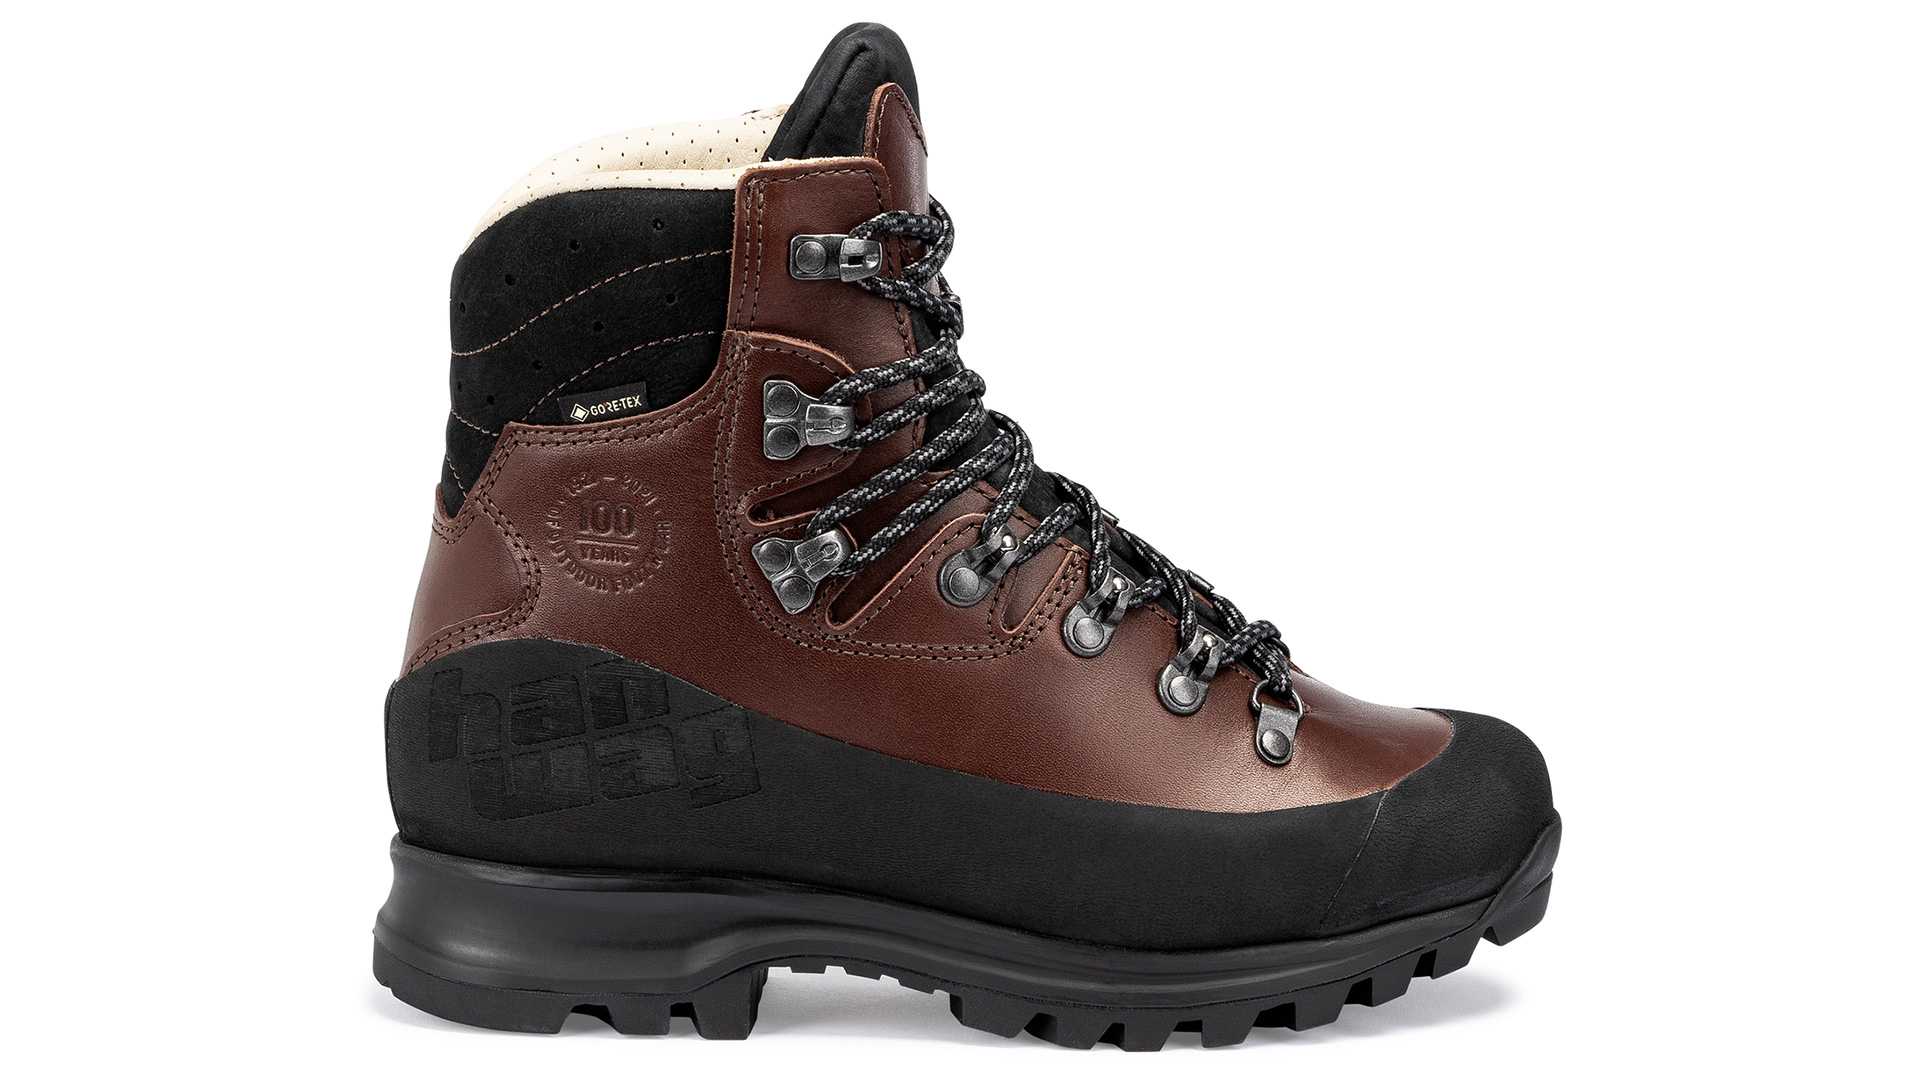 Hanwag has launched a heritage collection based on its hiking boot ...